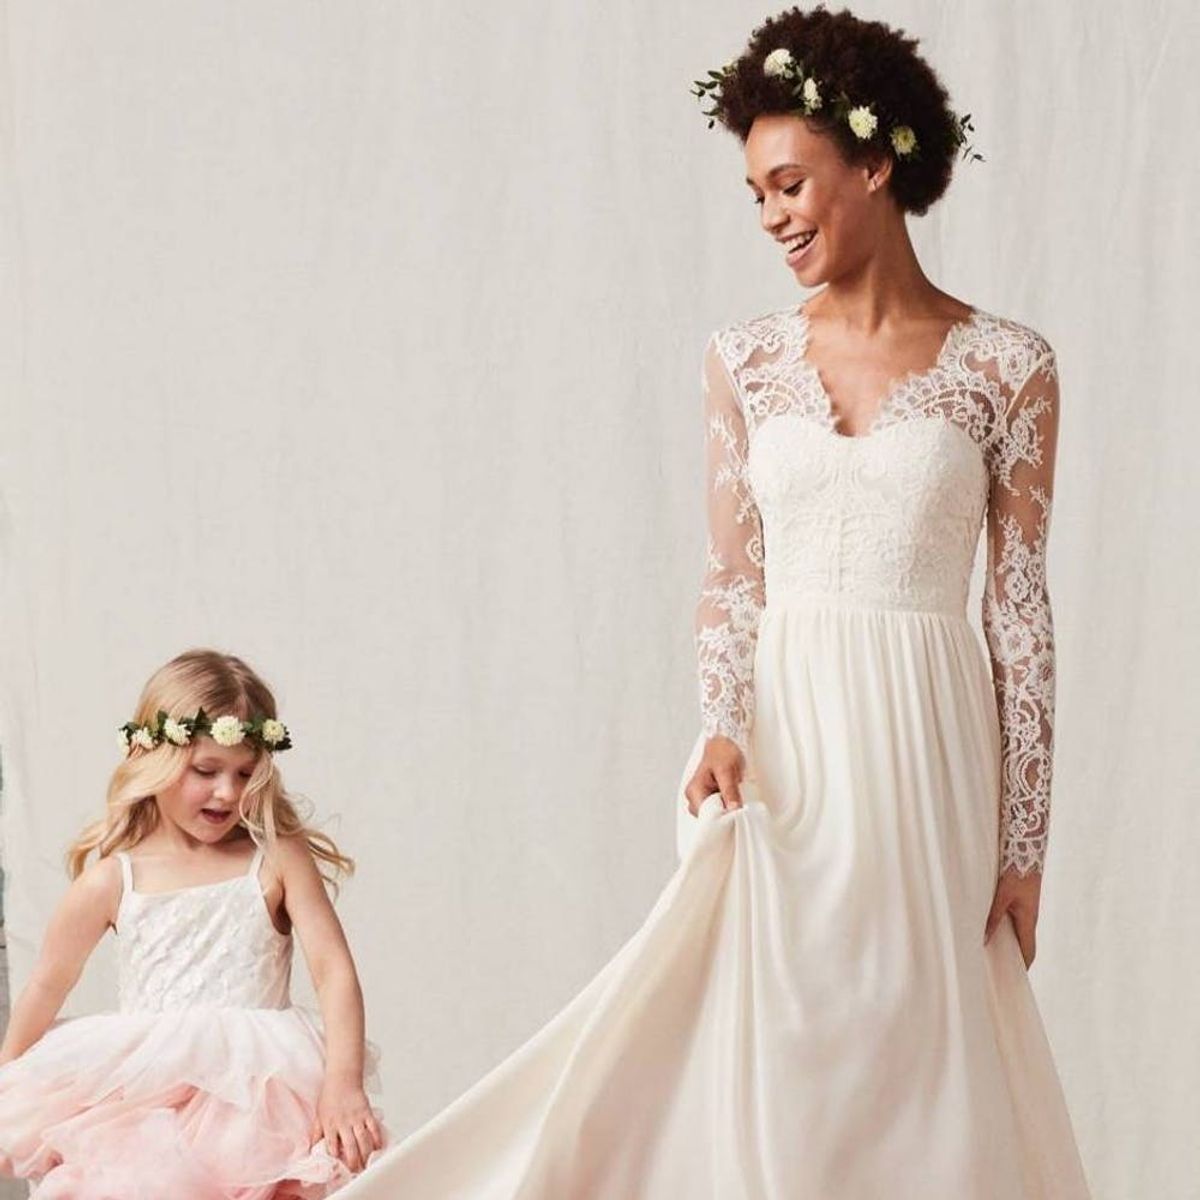 H&M’s New Wedding Collection Includes Gowns That Look Like Kate and Pippa Middleton’s